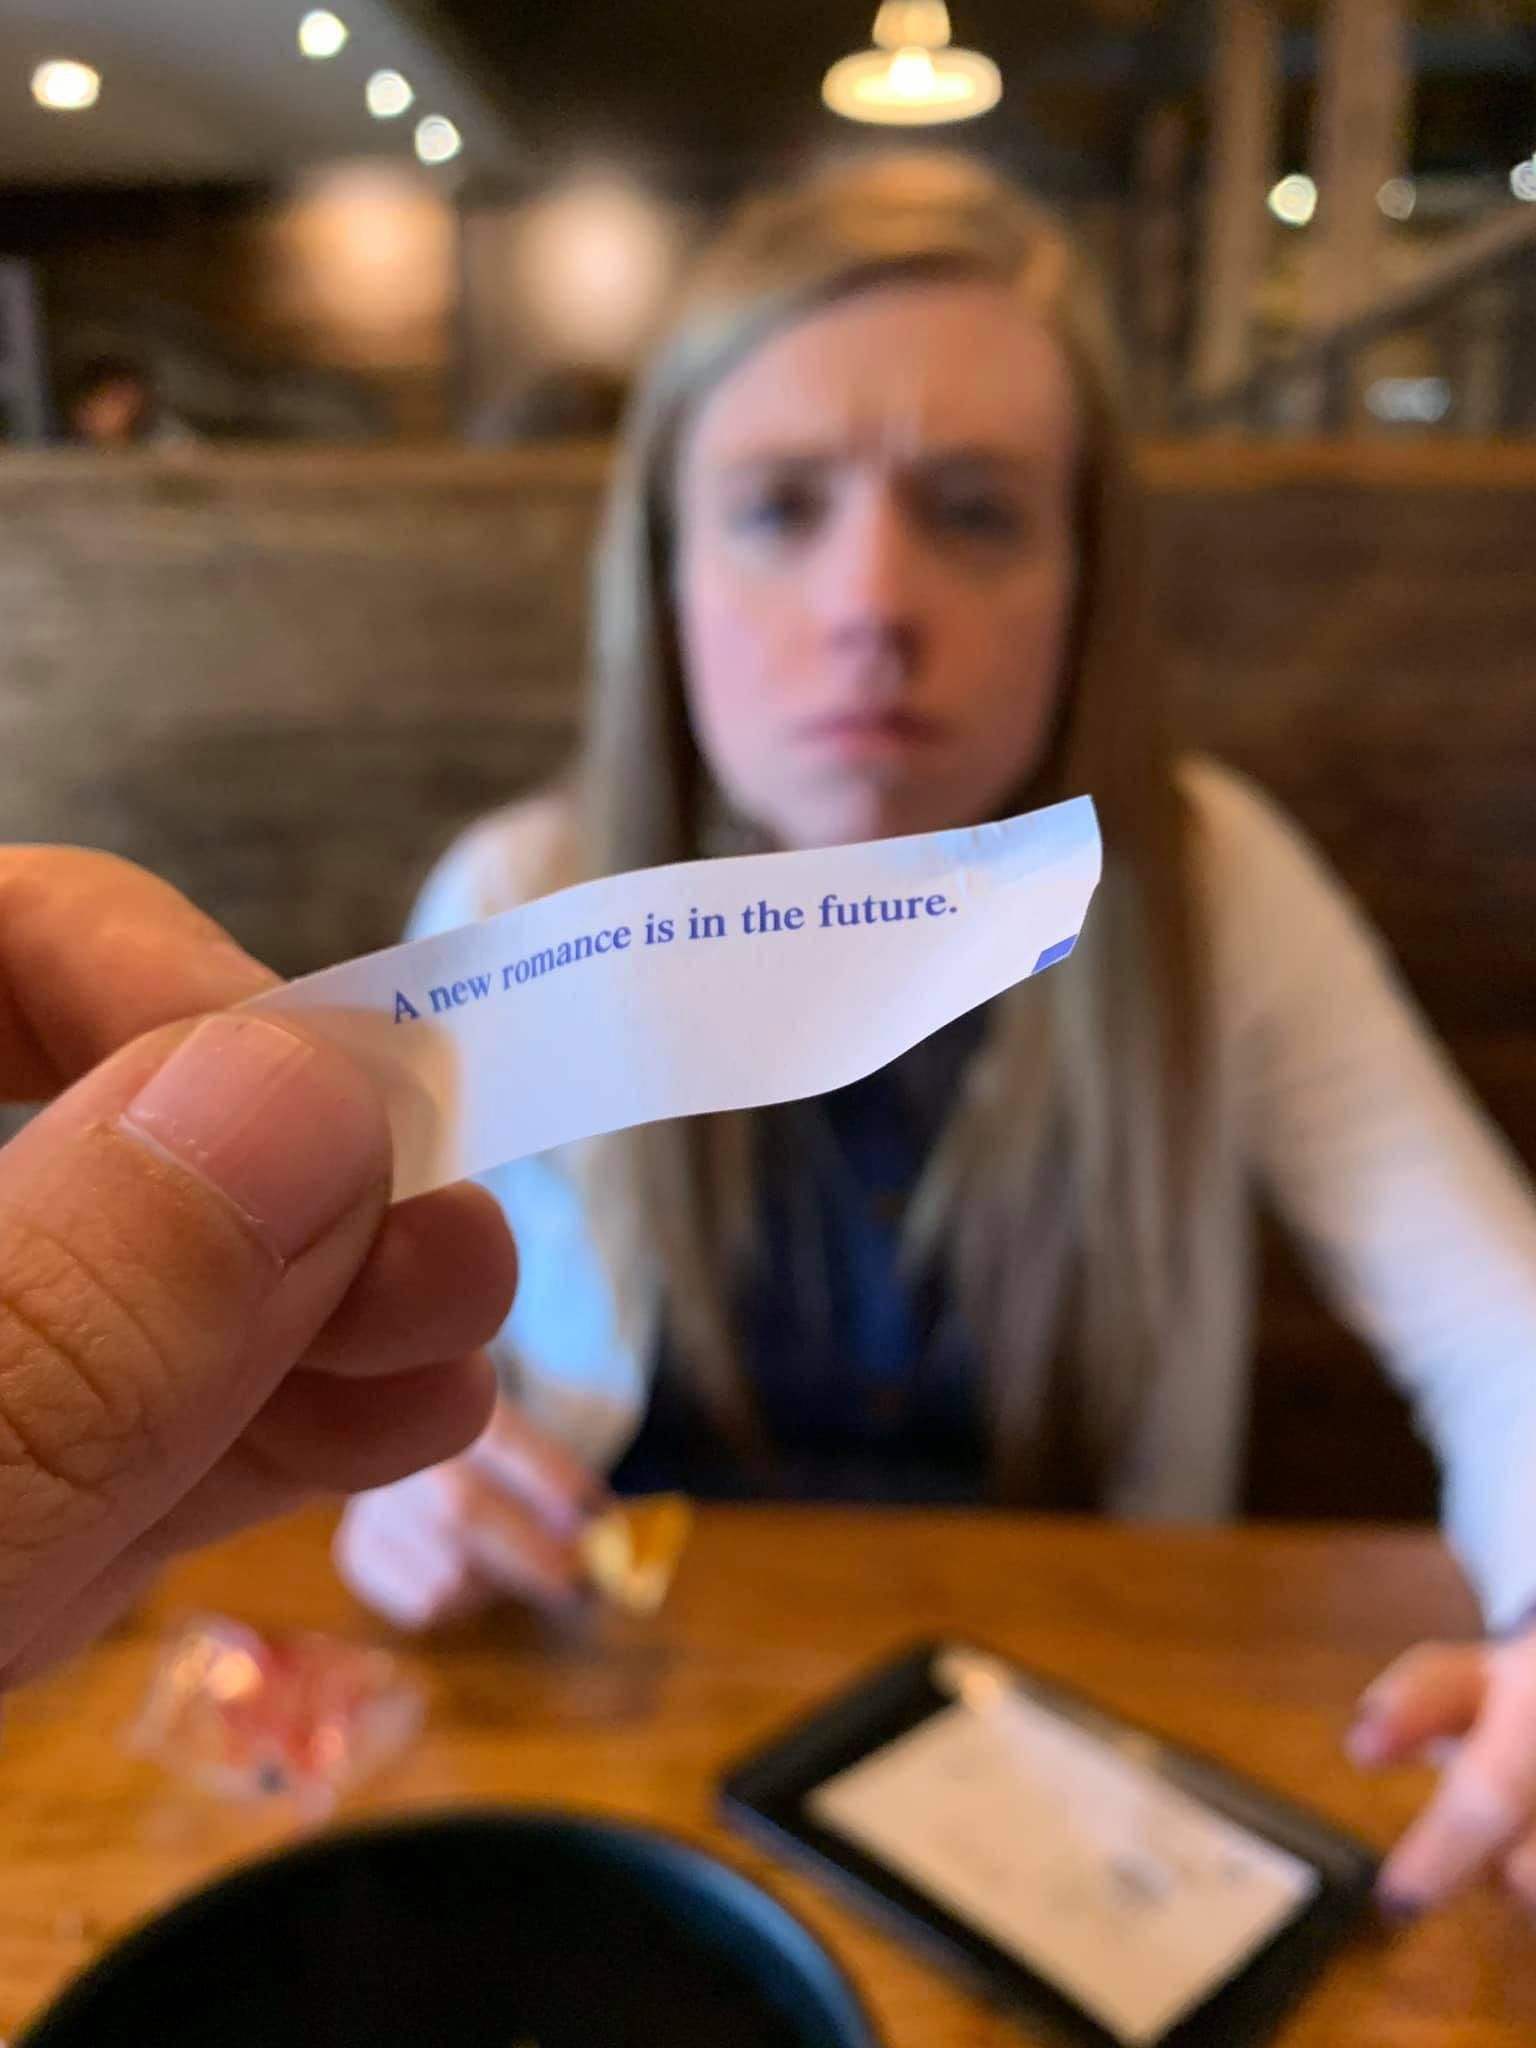 My fortune cookie’s trying to start some drama with my wife and I.